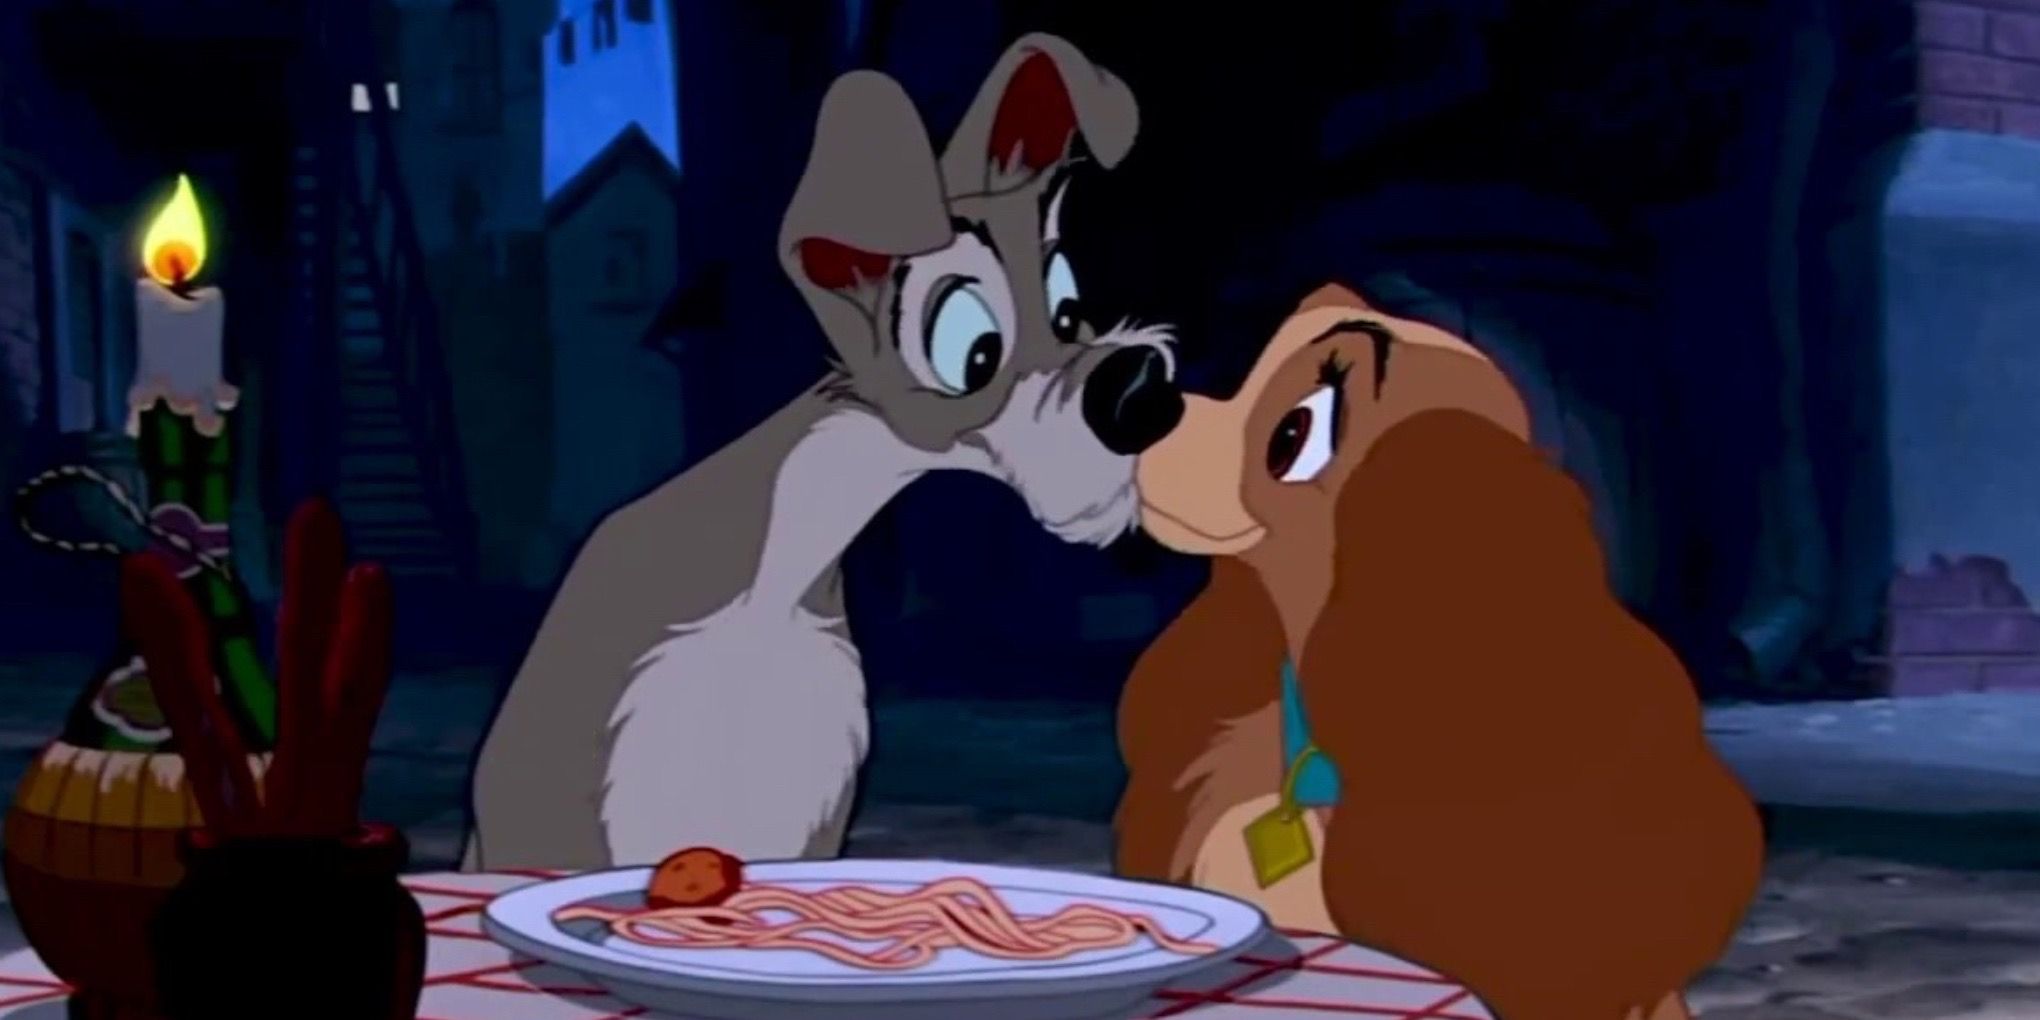 A still from Disney’s Lady and the Tramp (1955)